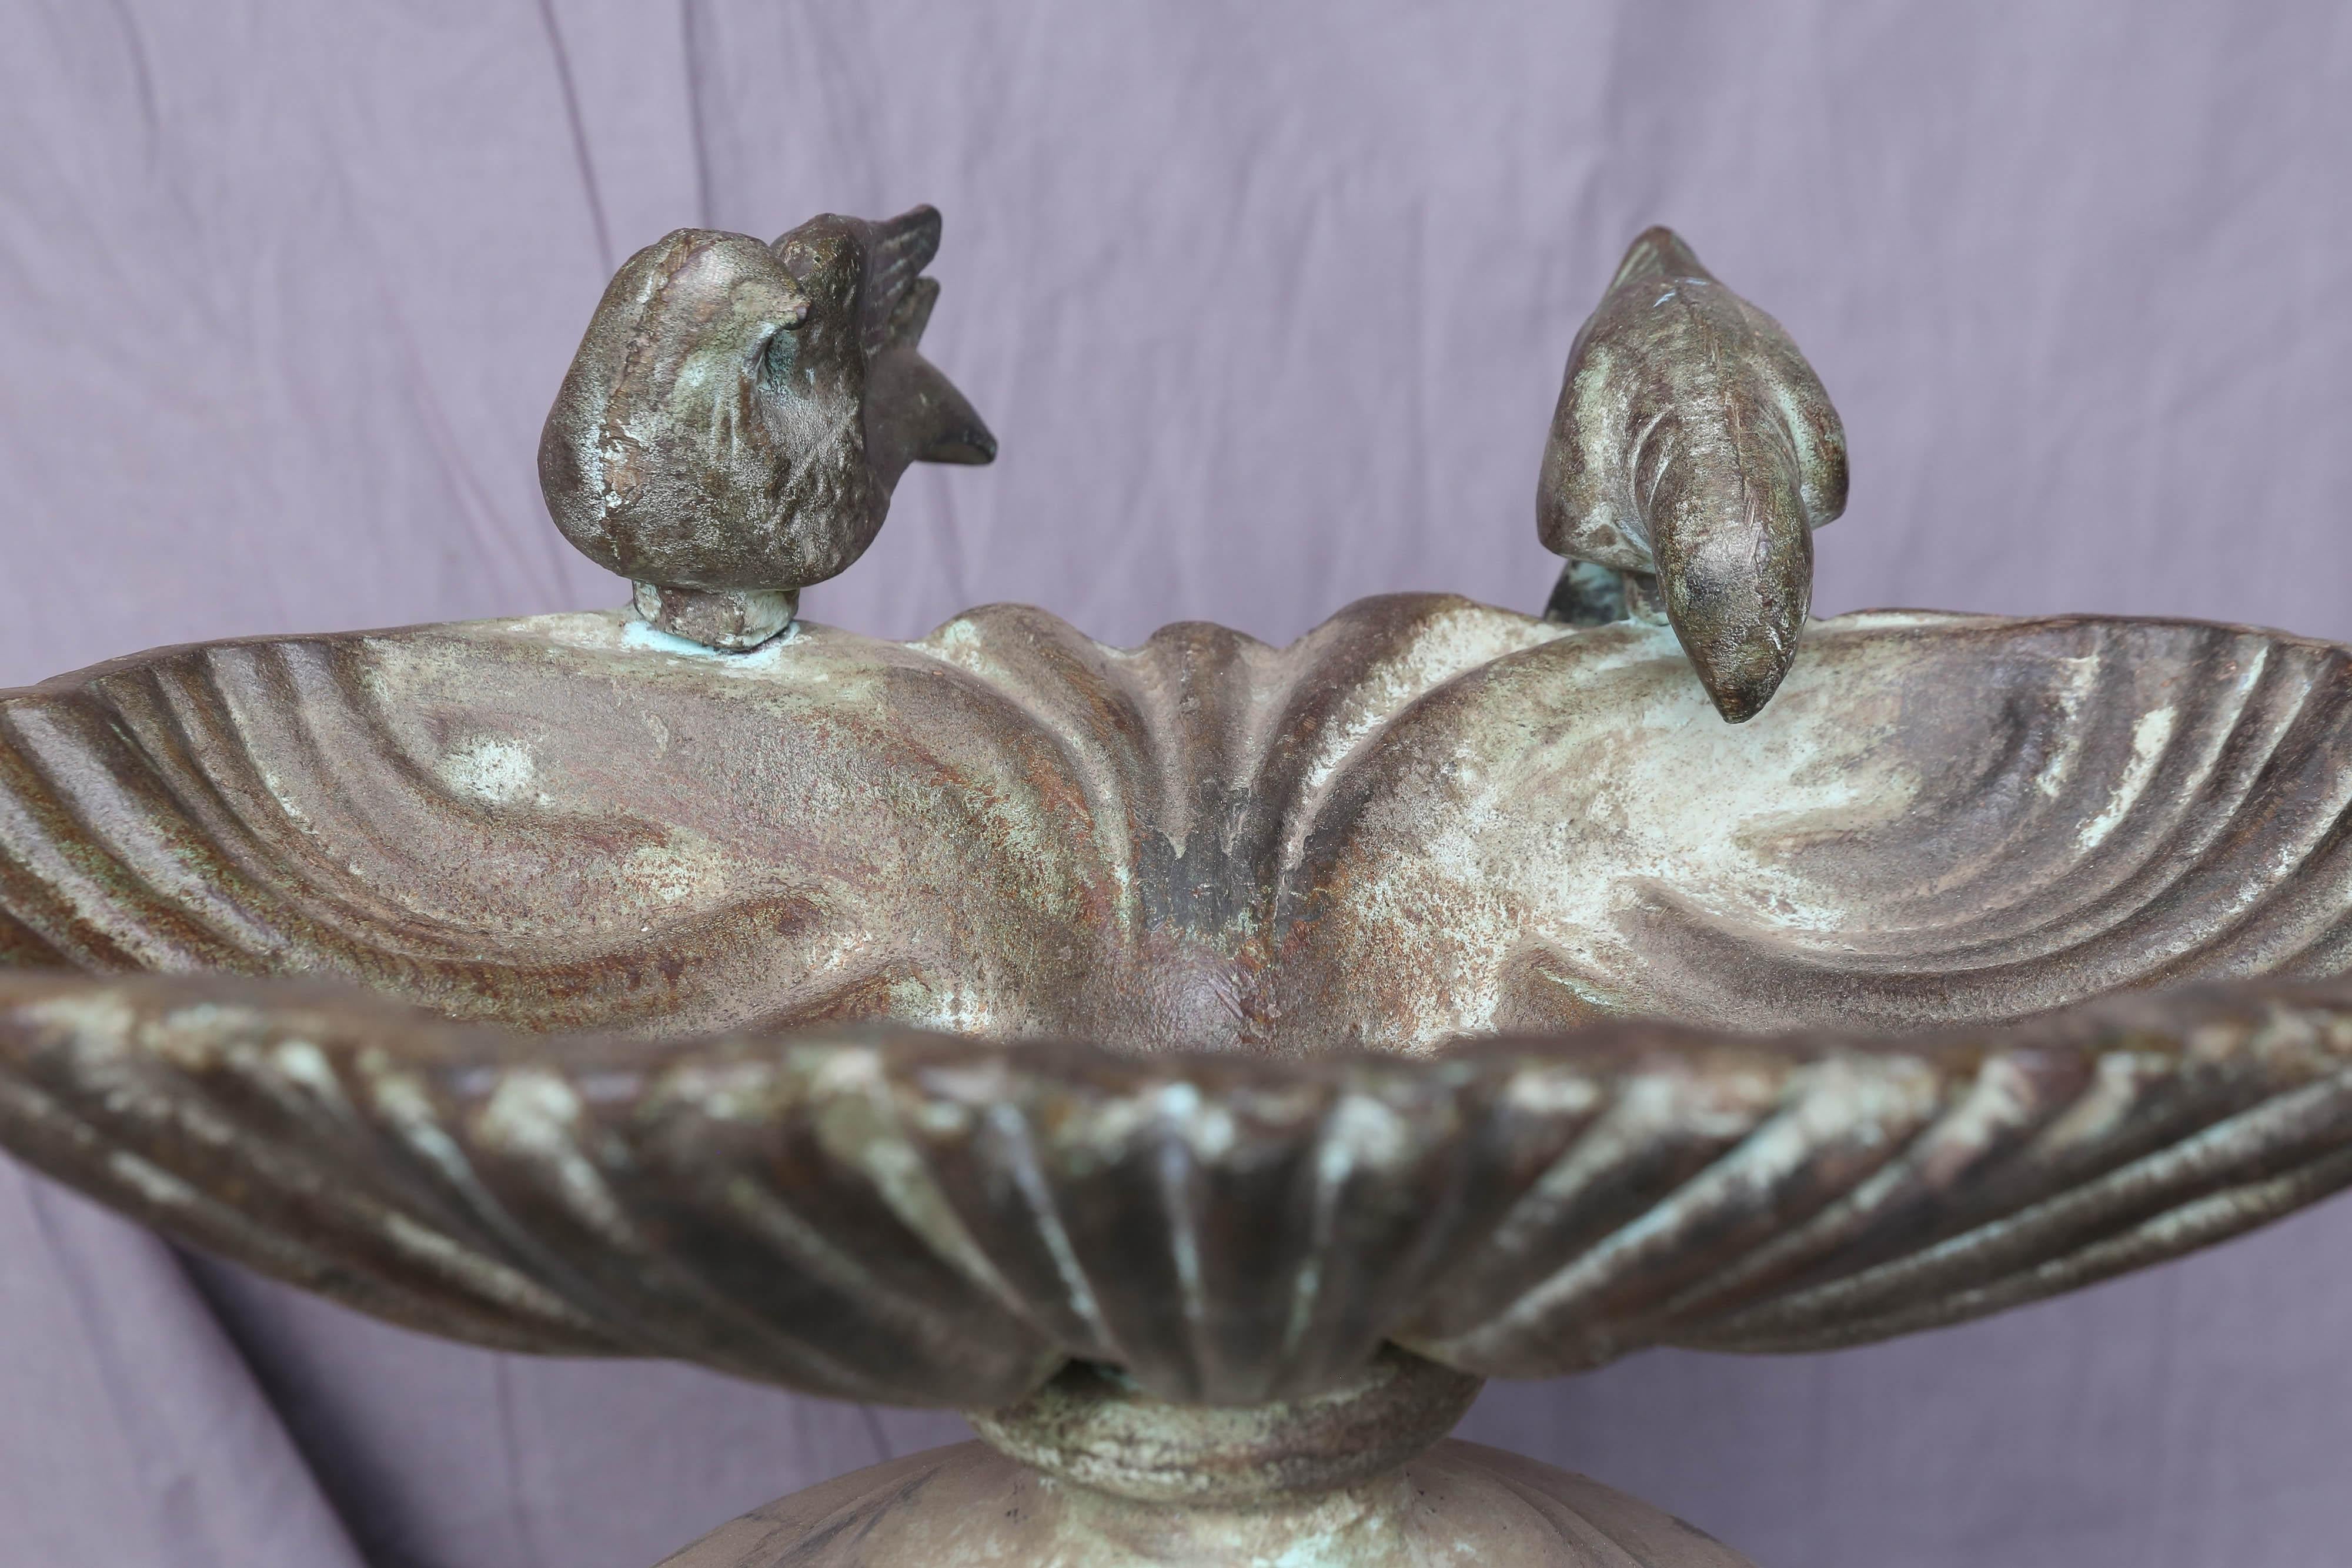 20th Century Cute Cast Iron Bird Bath from the Back Yard Garden of a Colonial Home